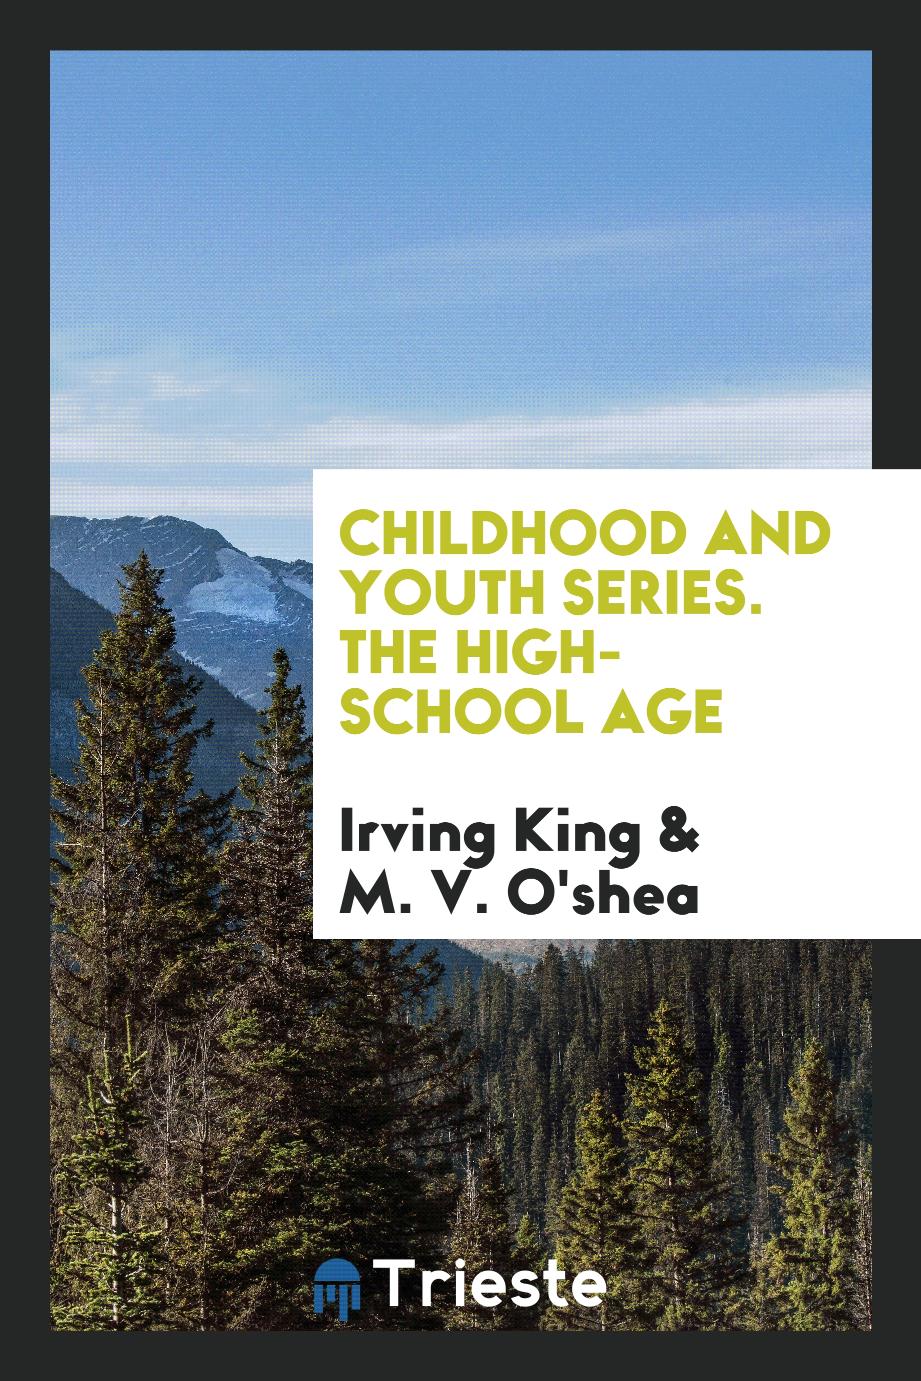 Childhood and Youth Series. The High-School Age